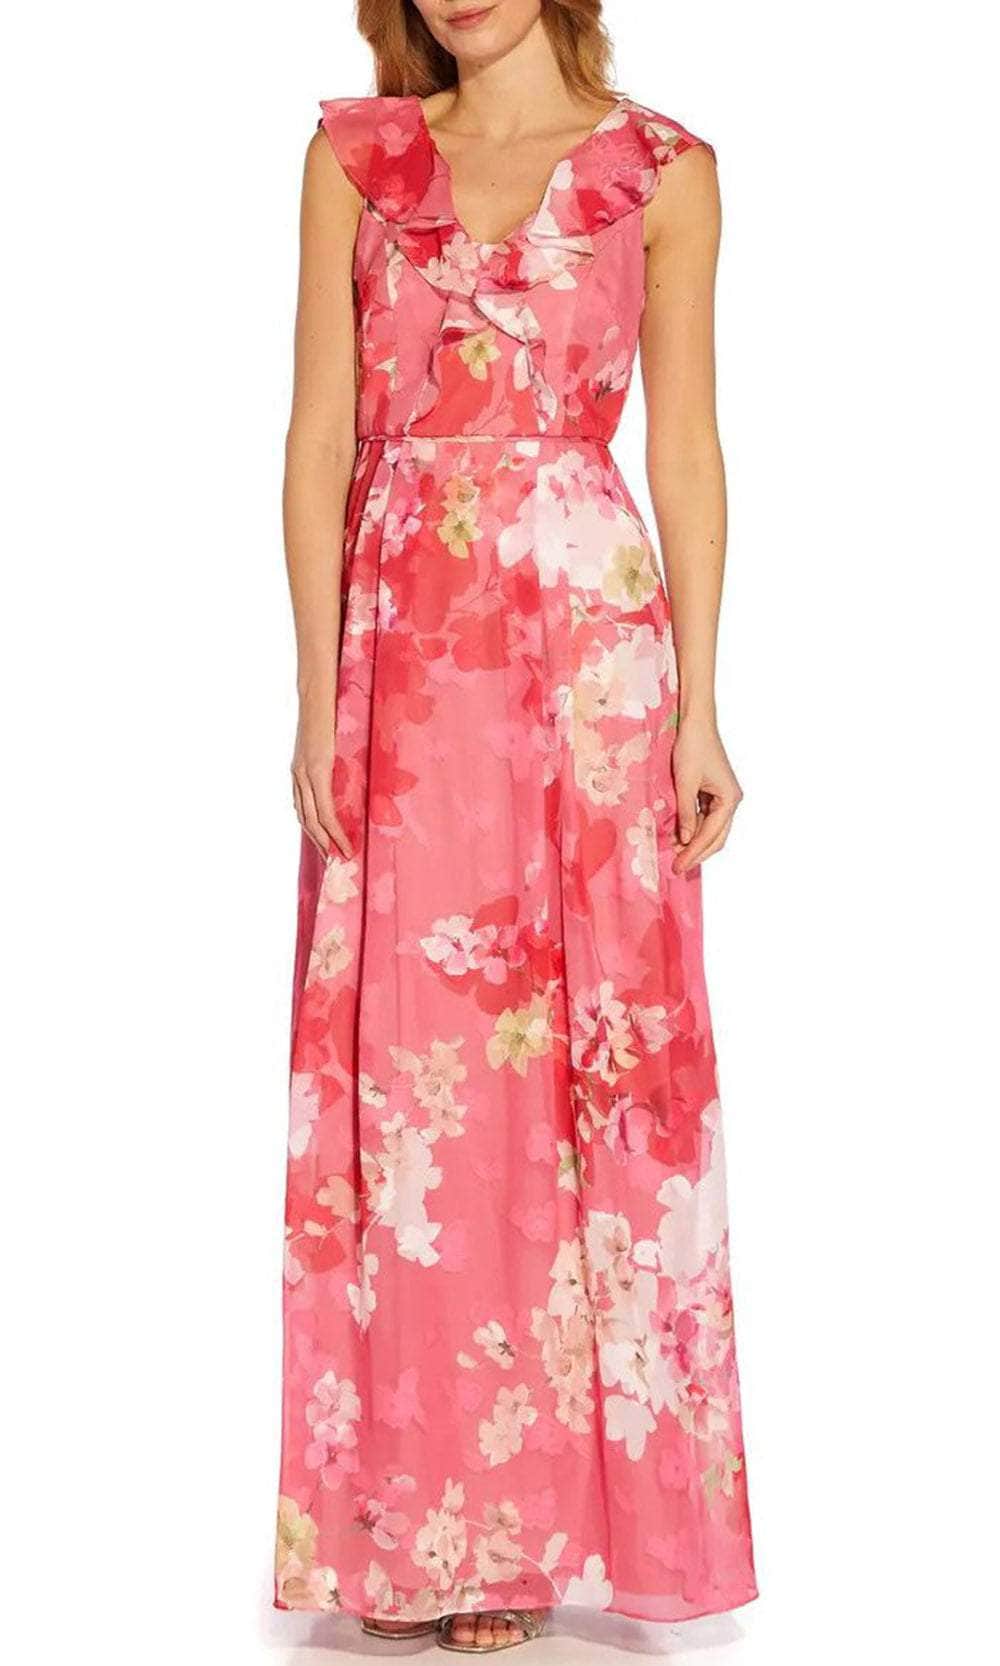 Adrianna Papell AP1E209744 - Ruffle Trimmed Floral Dress Special Occasion Dress